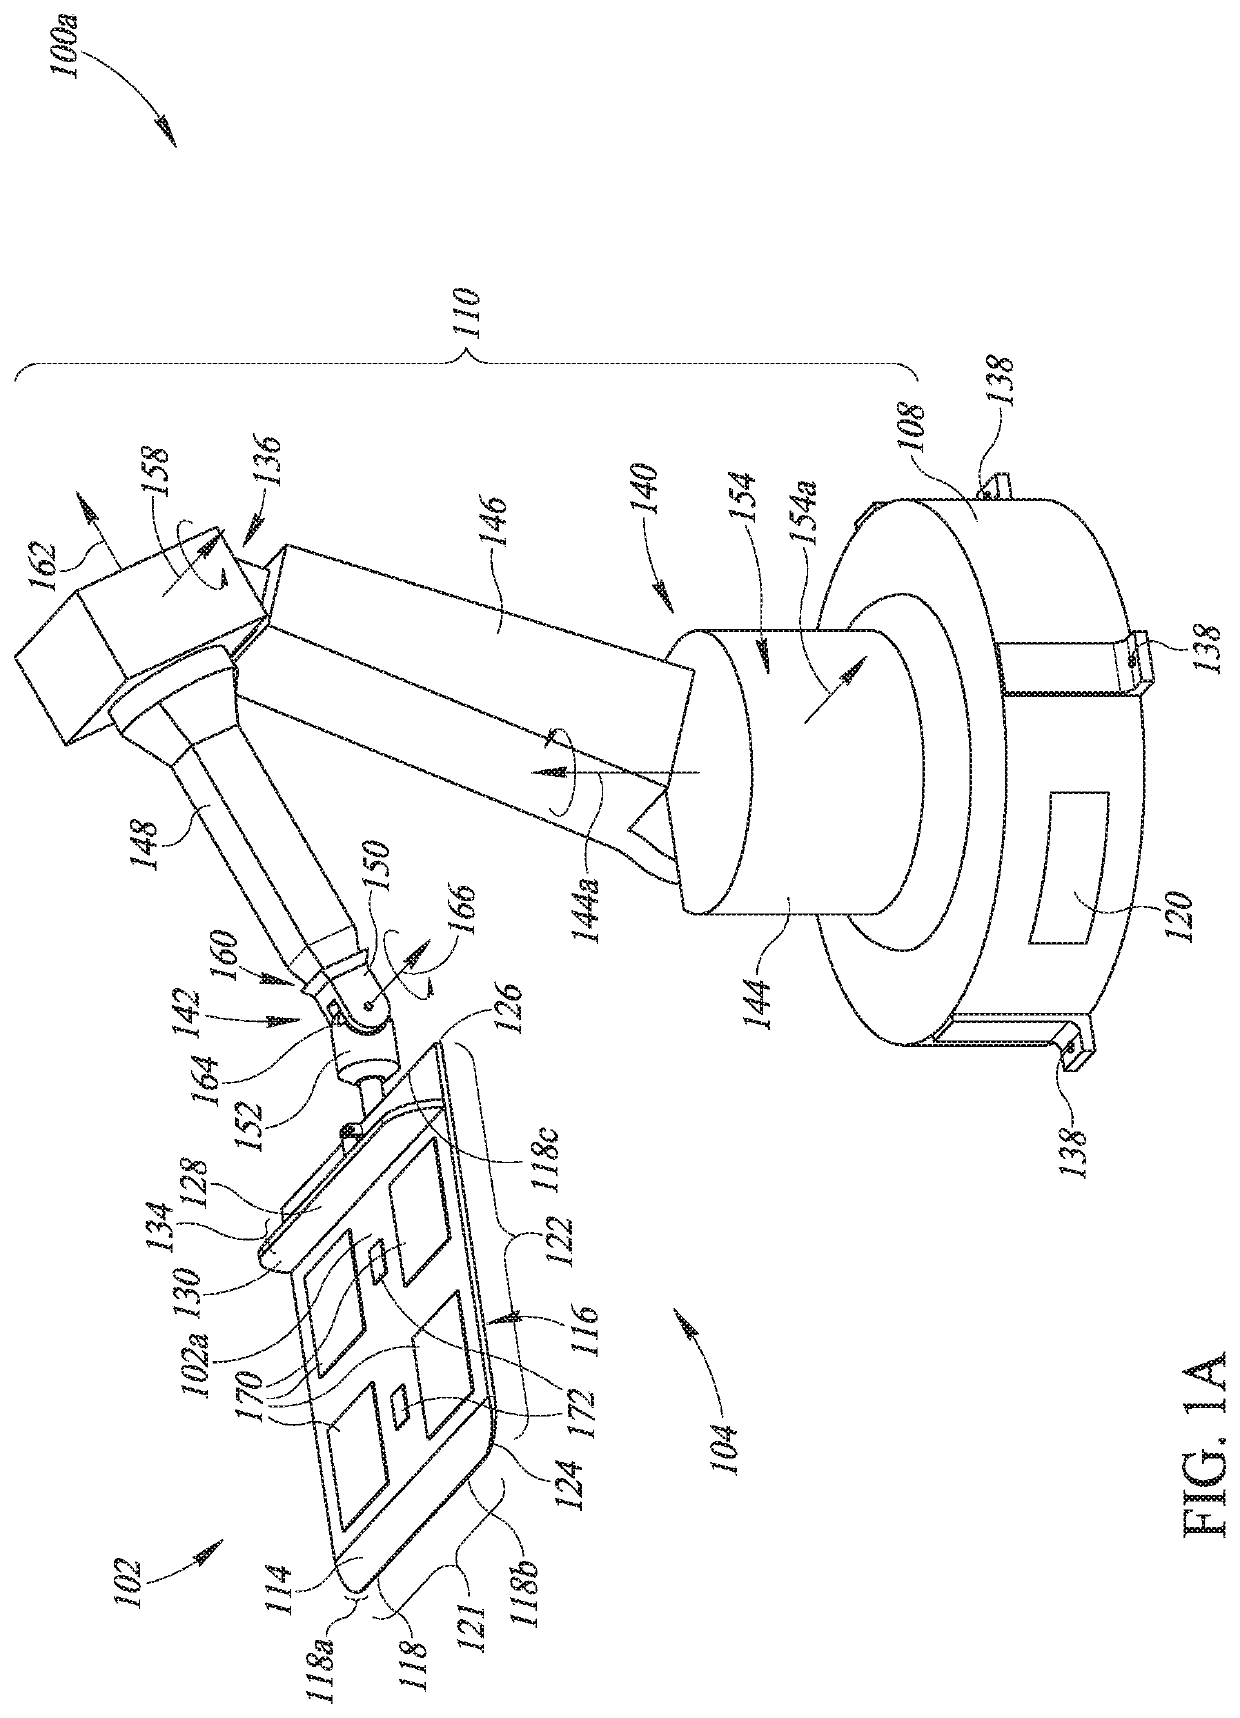 On-demand robotic food assembly equipment, and related systems and methods